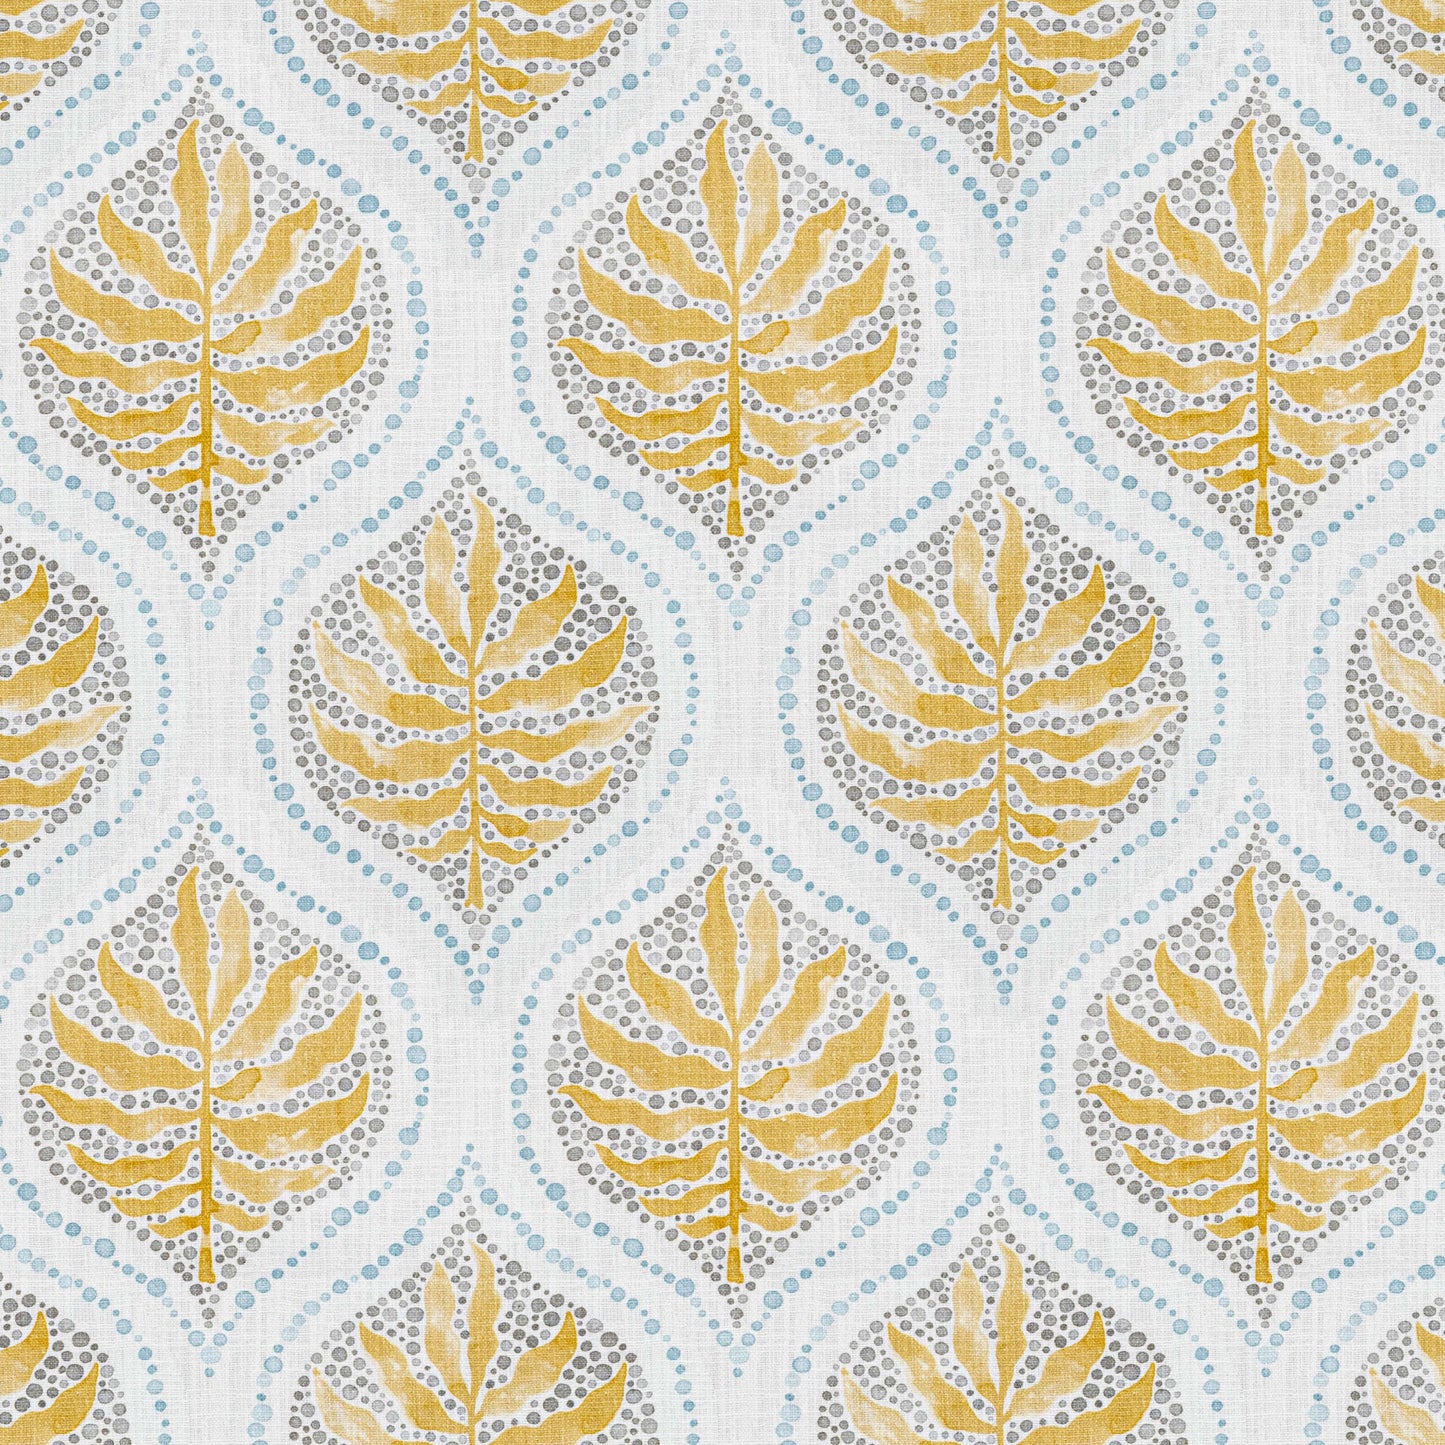 Scalloped Valance in Airlie Amber Ogee Floral Watercolor- Gold, Gray, Blue